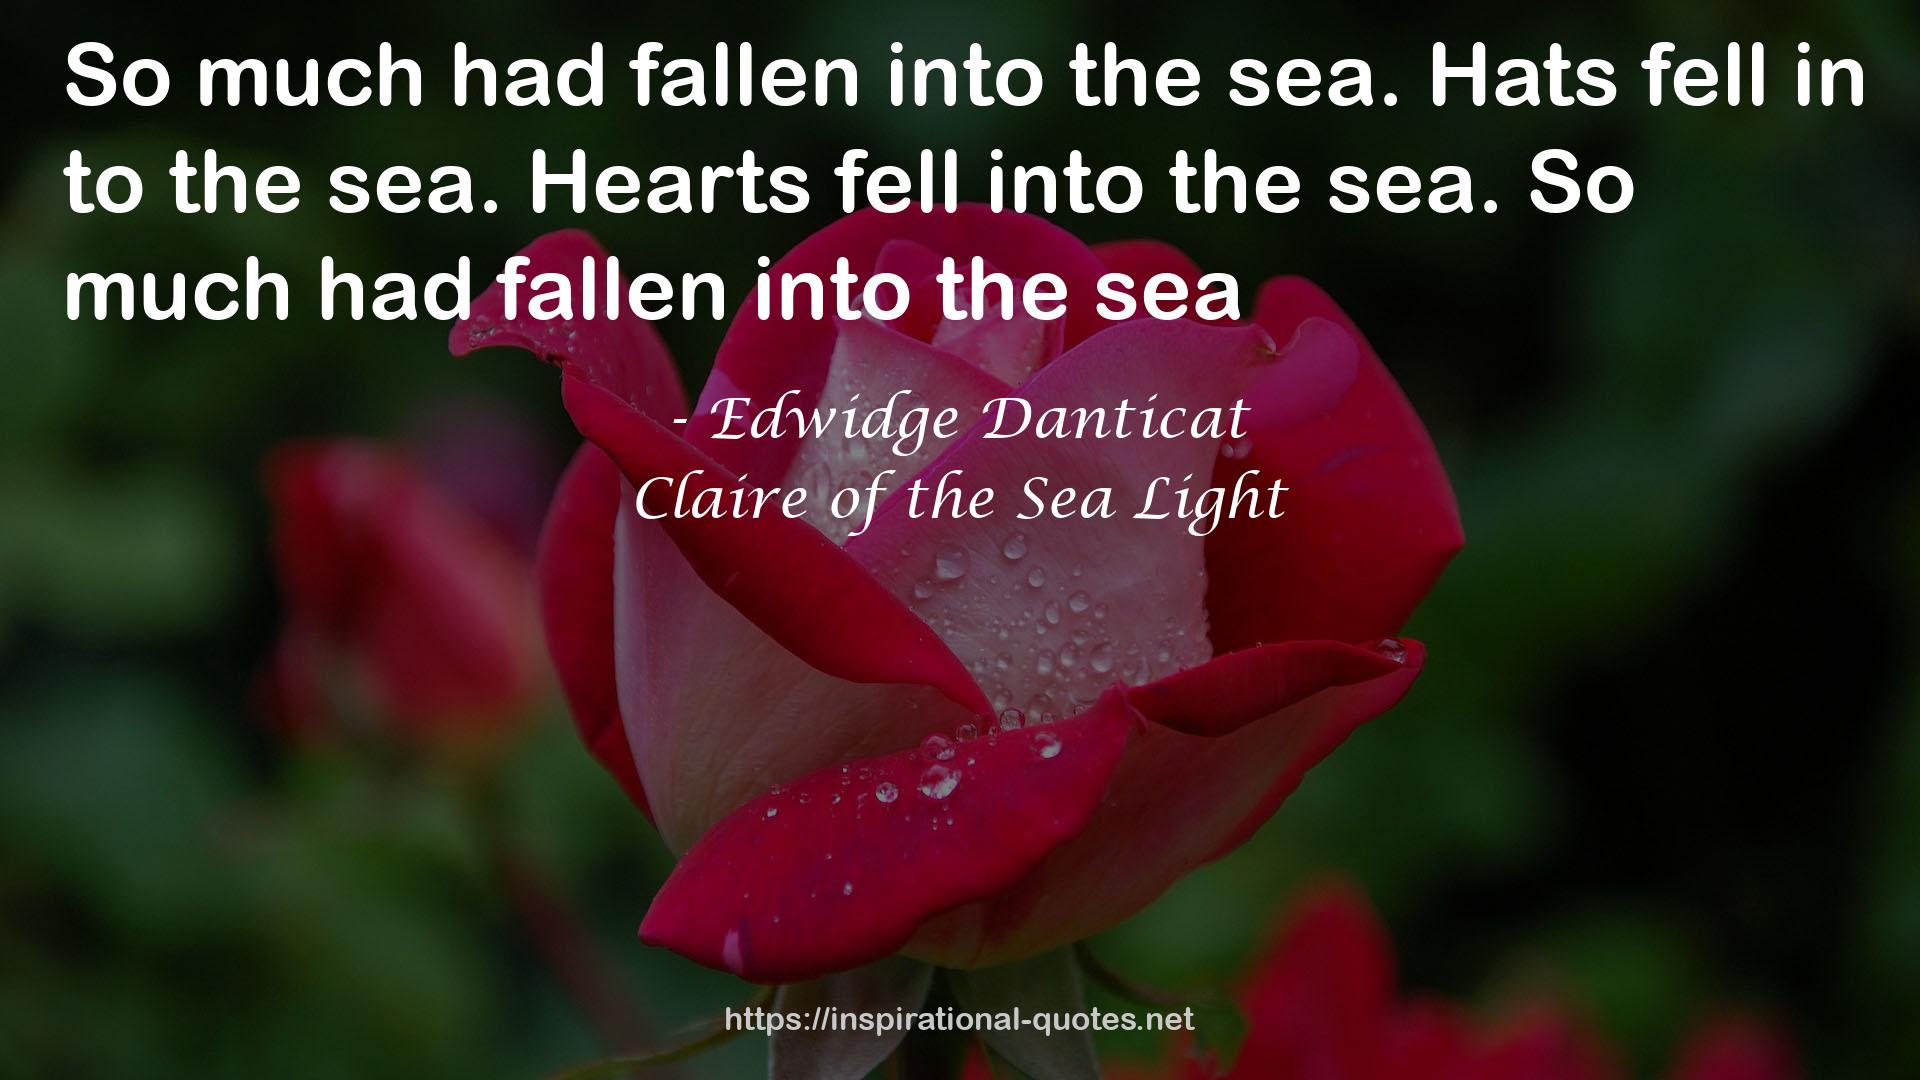 Claire of the Sea Light QUOTES